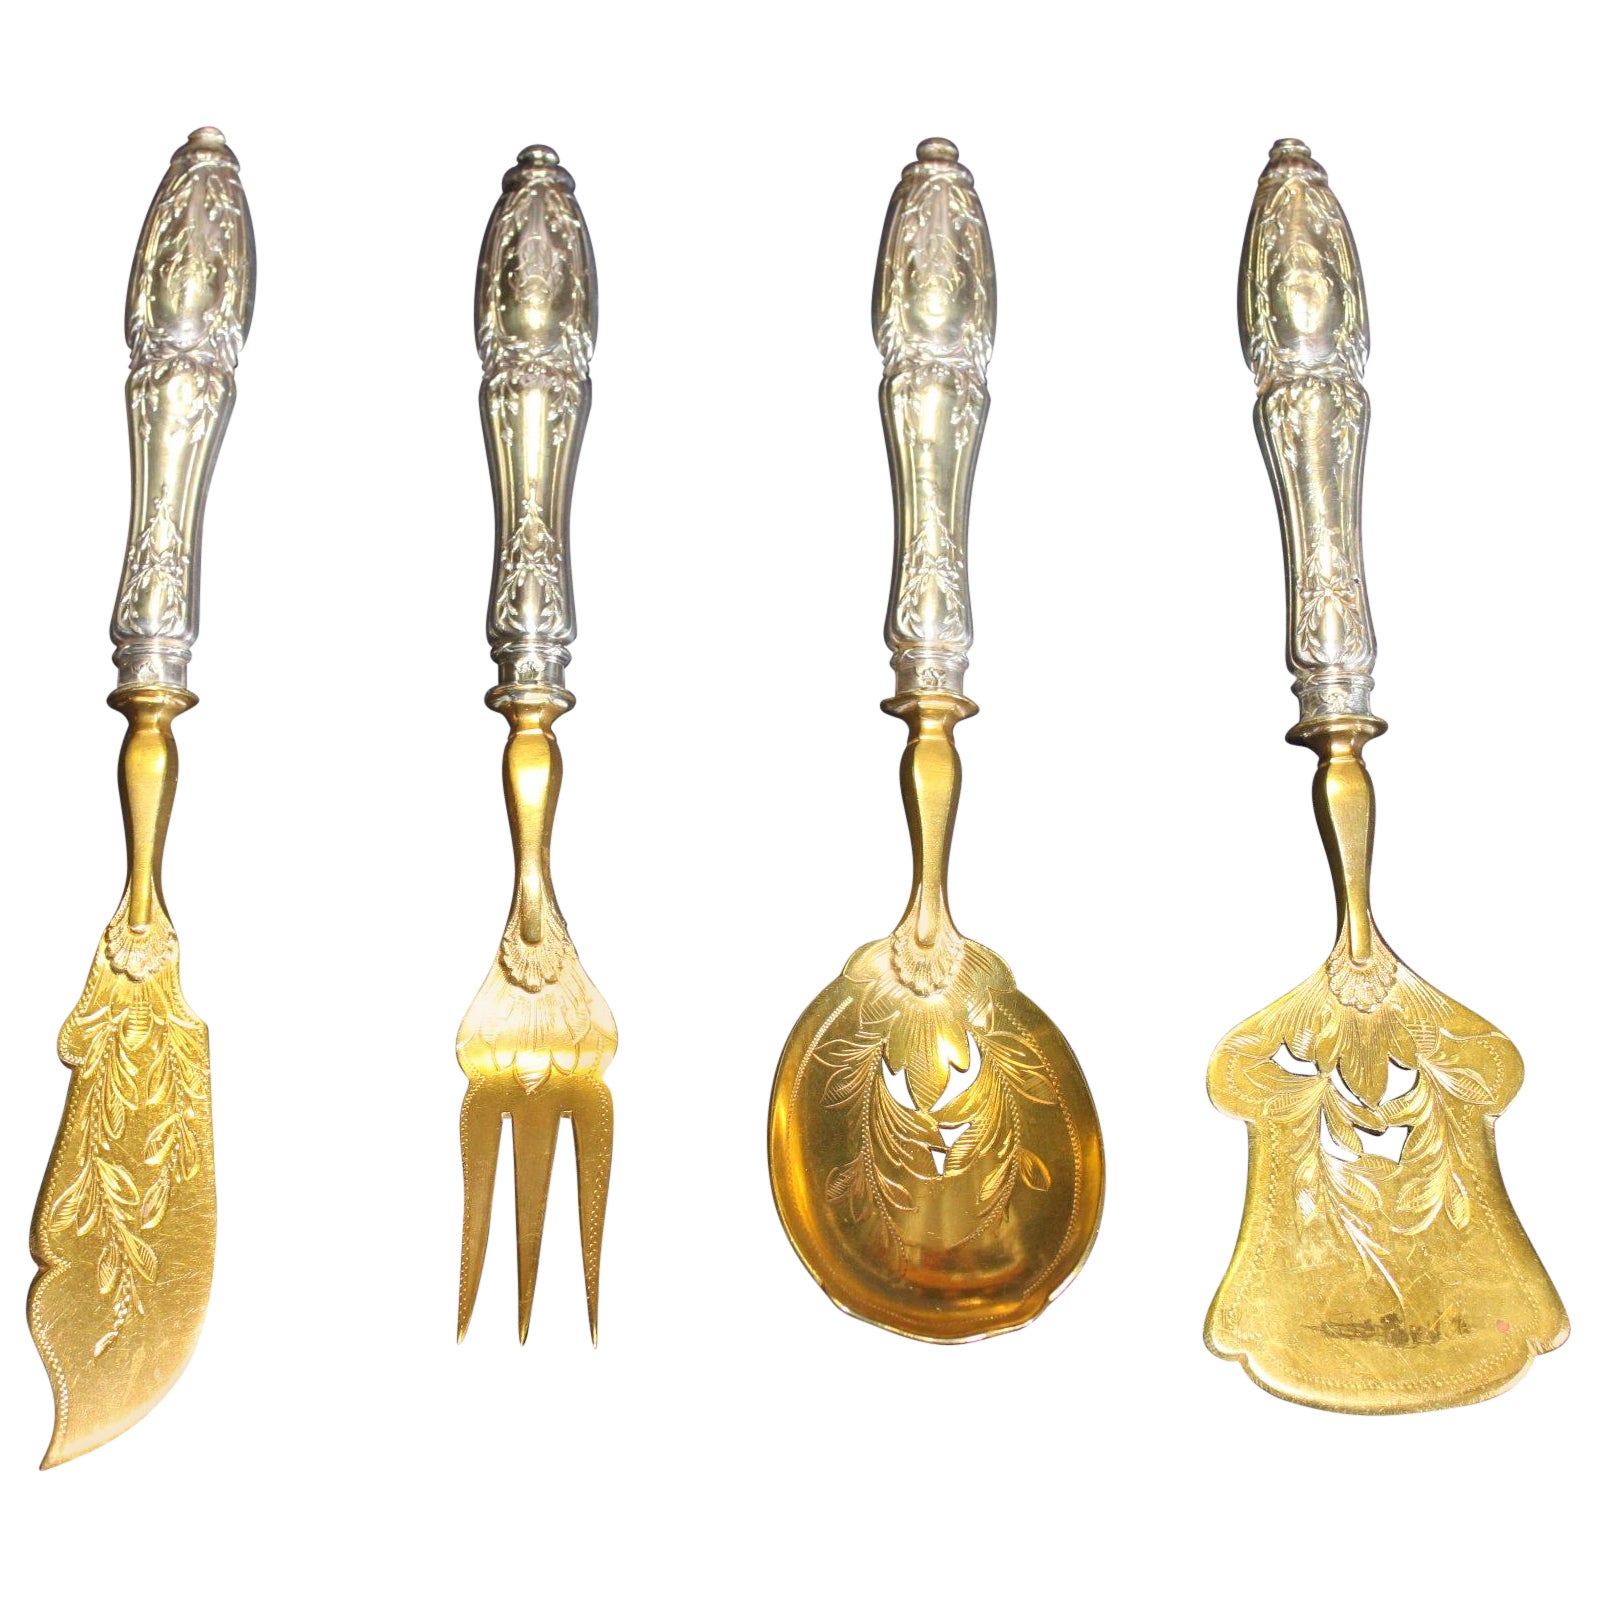 Silver Gilt Hors d'oeuvres Set